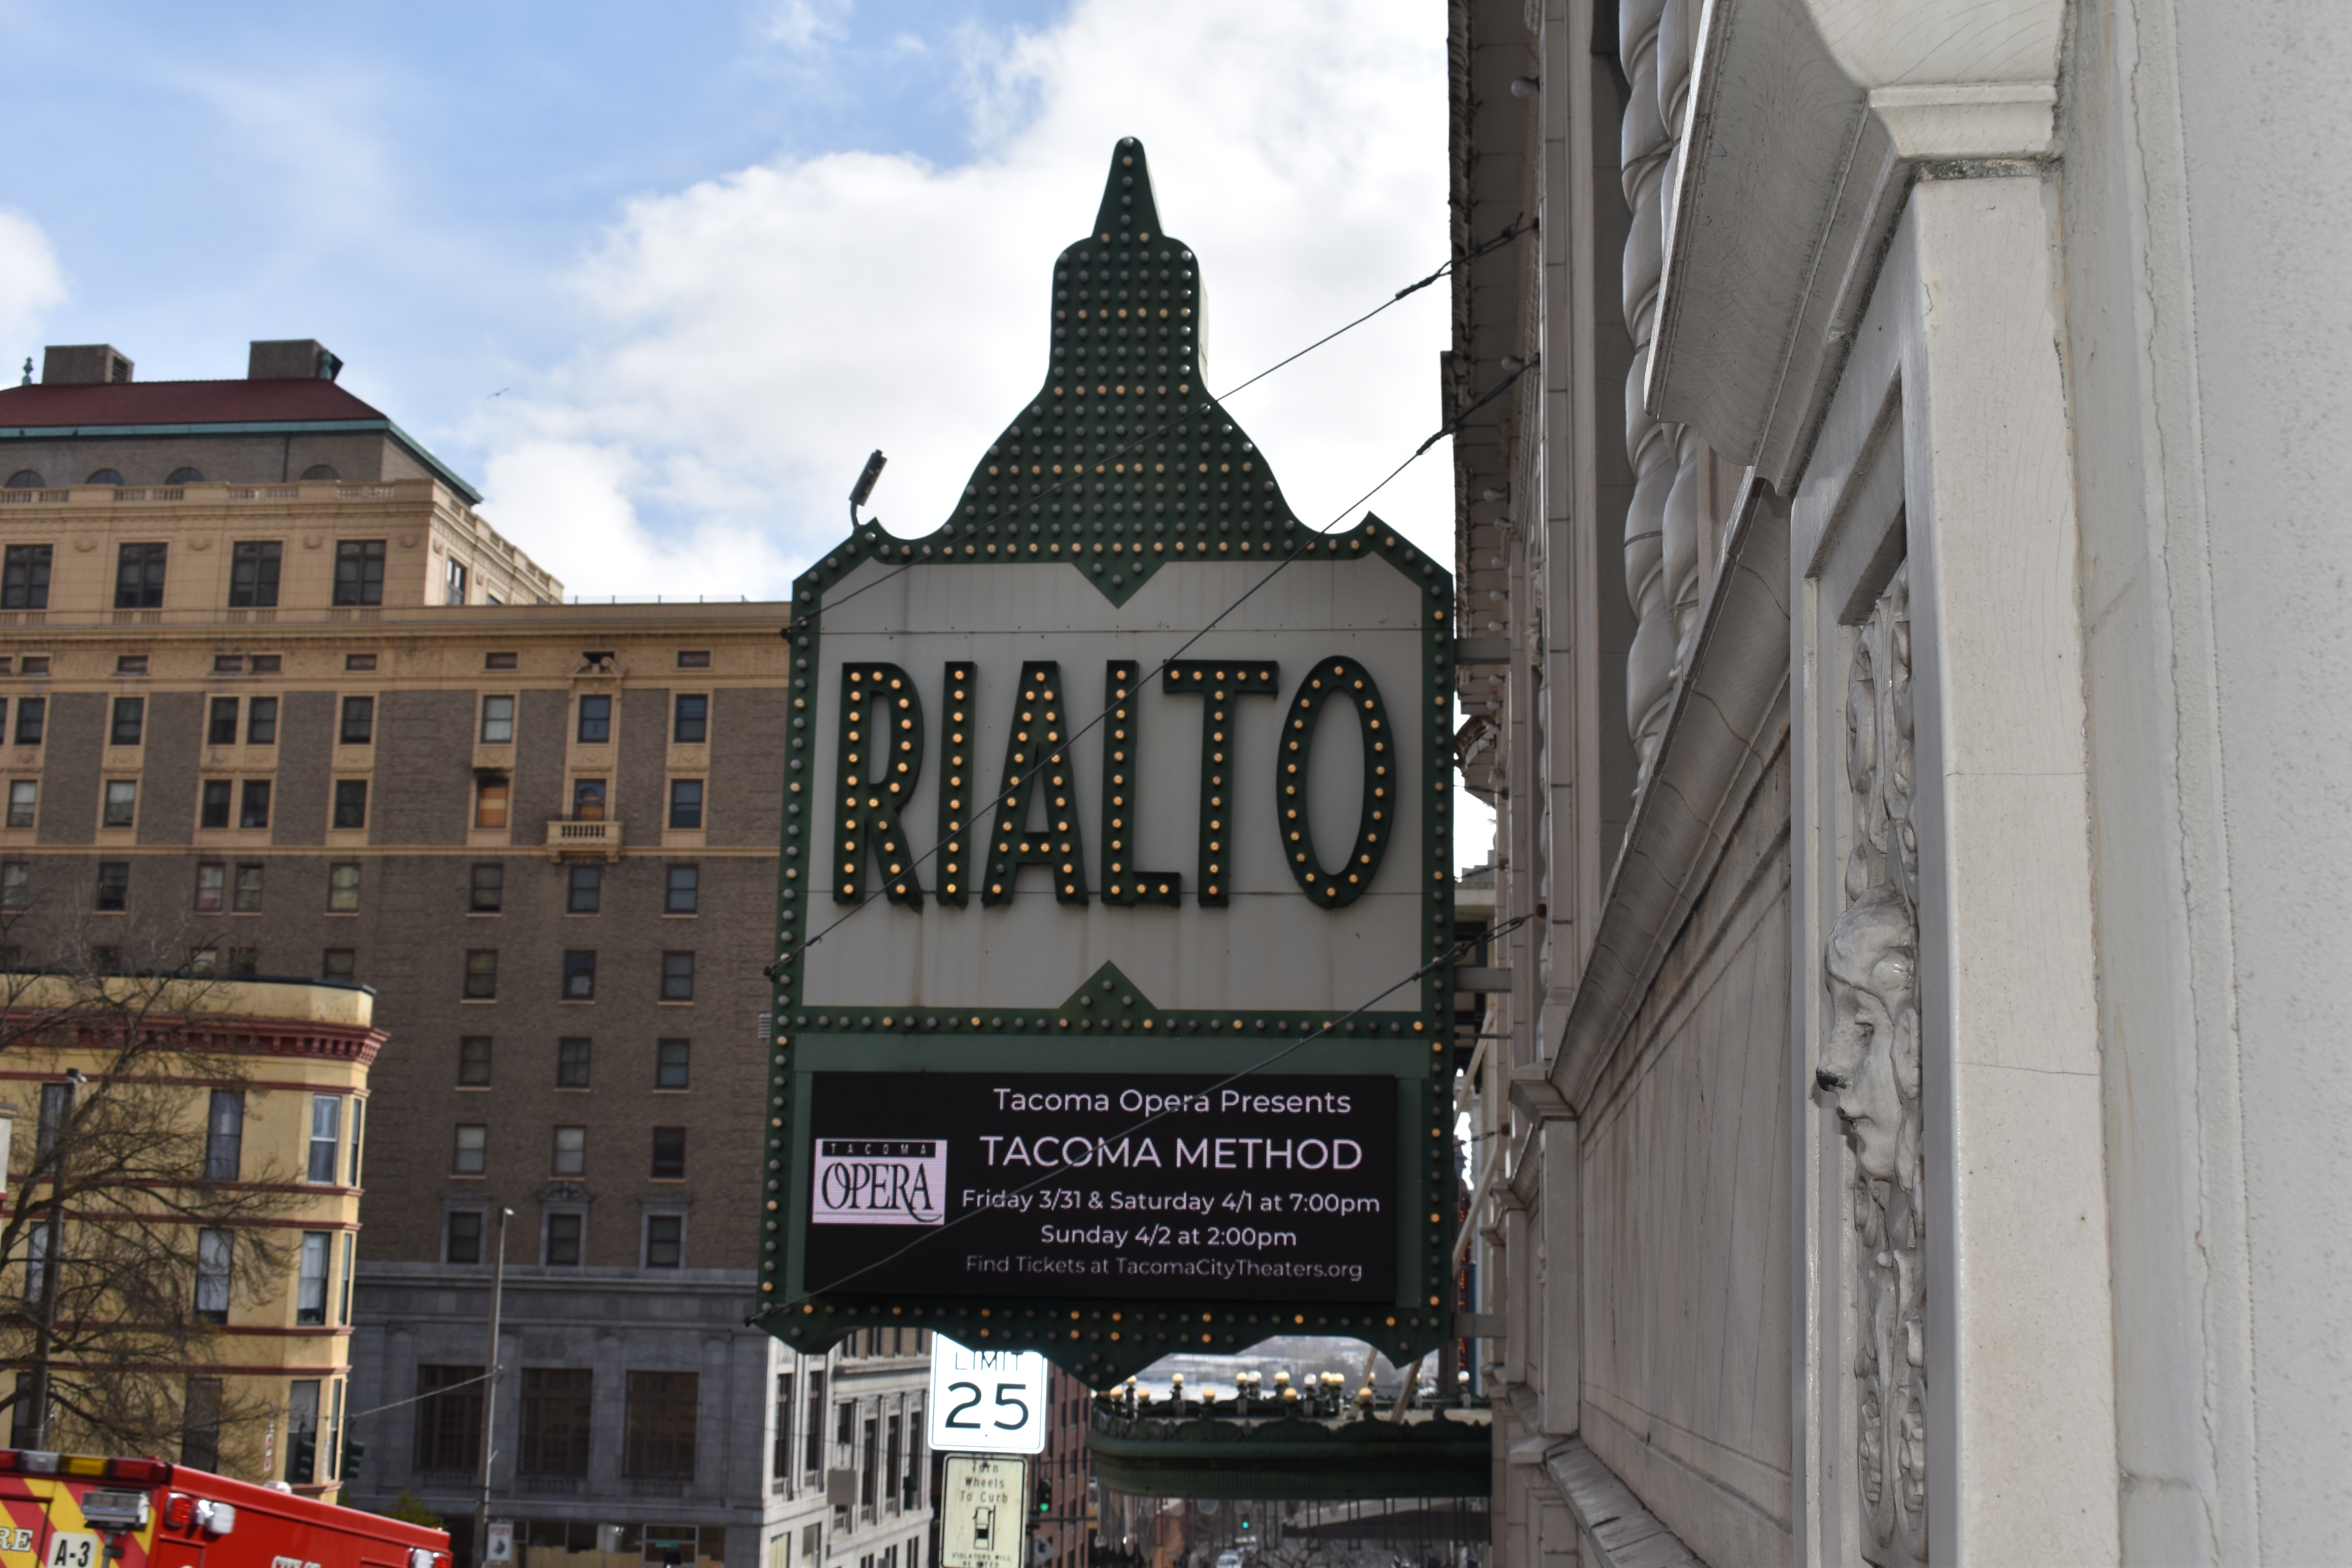 A photo of the marquee outside the Tacoma Opera's premiere of the Tacoma Method opera shows a green rimmed marquee with the word "Rialto" in large block letters. There are office buildings in the background and the signs hangs above a street. In the far background is a blue sky with bright, white clouds.